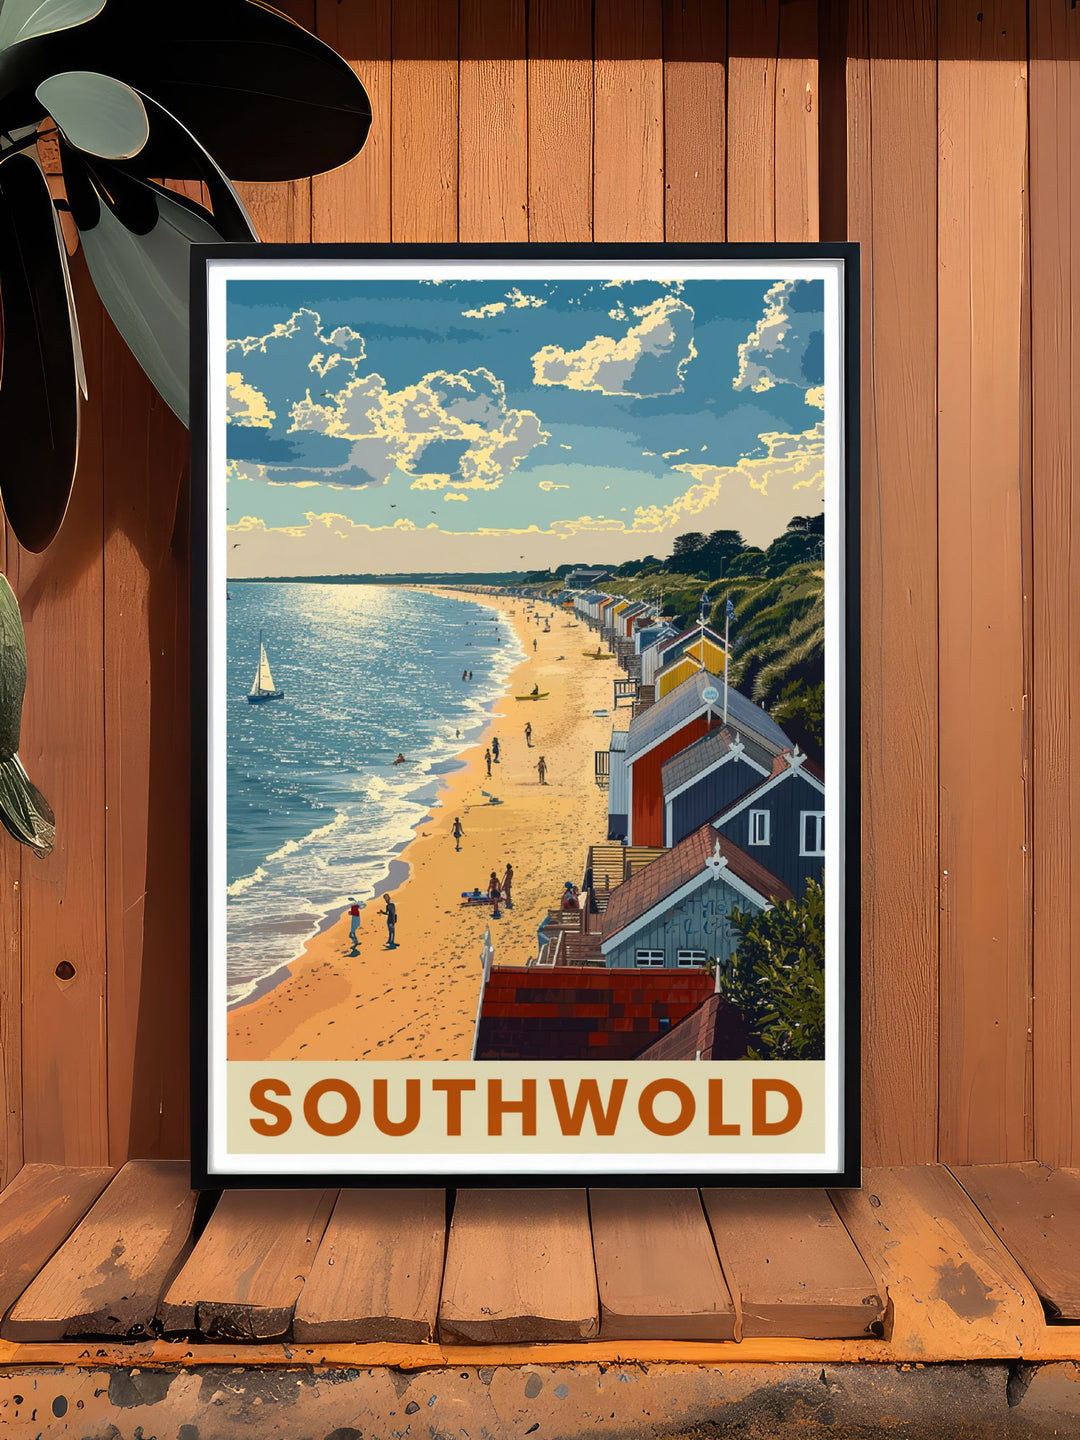 Southwold Print featuring detailed illustrations of beach and beach huts complemented by the iconic Southwold Lighthouse and pier ideal for enhancing your home decor with a touch of Suffolk's coastal beauty